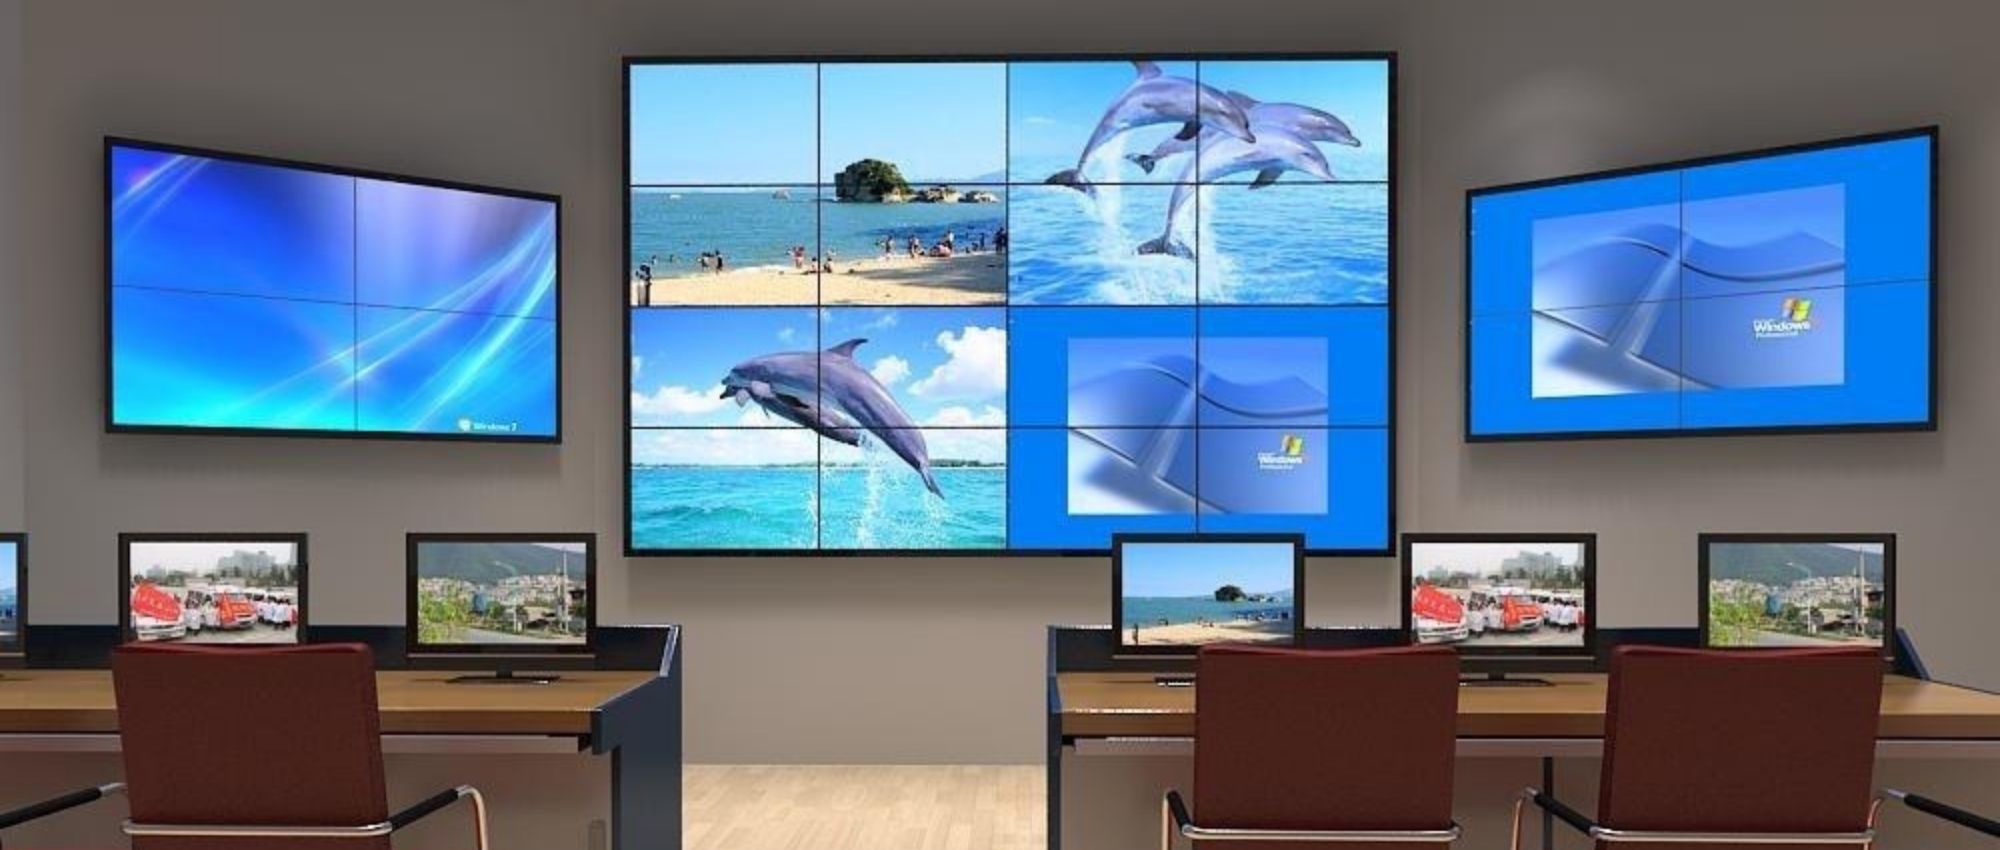 Lg Commercial Displays Touch Screen Video Wall Beten